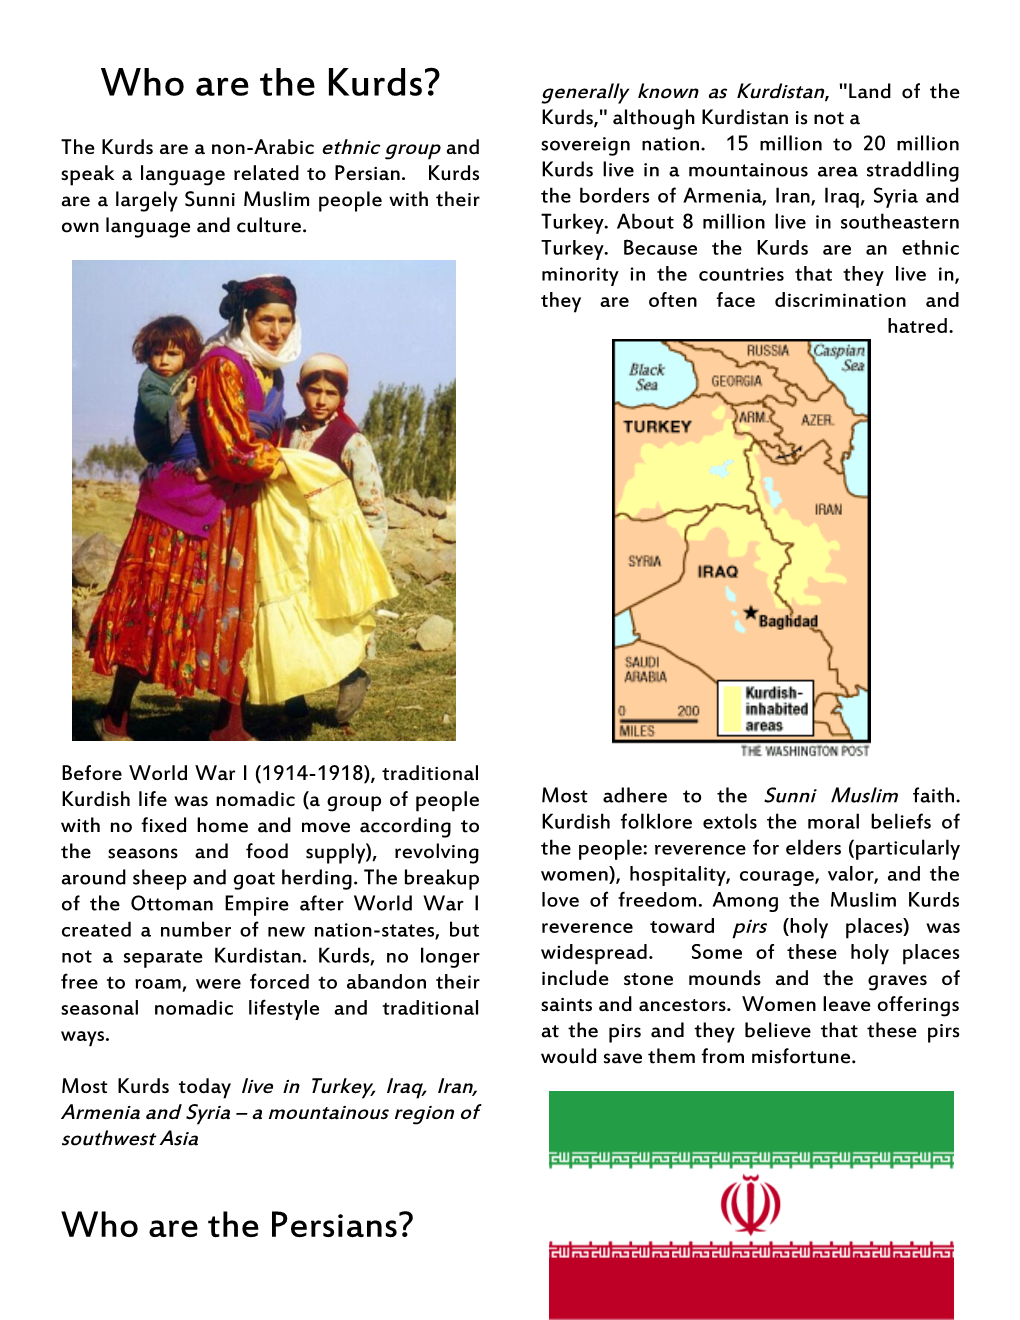 The Kurds Are a Non-Arabic Ethnic Group and Speak a Language Related to Persian